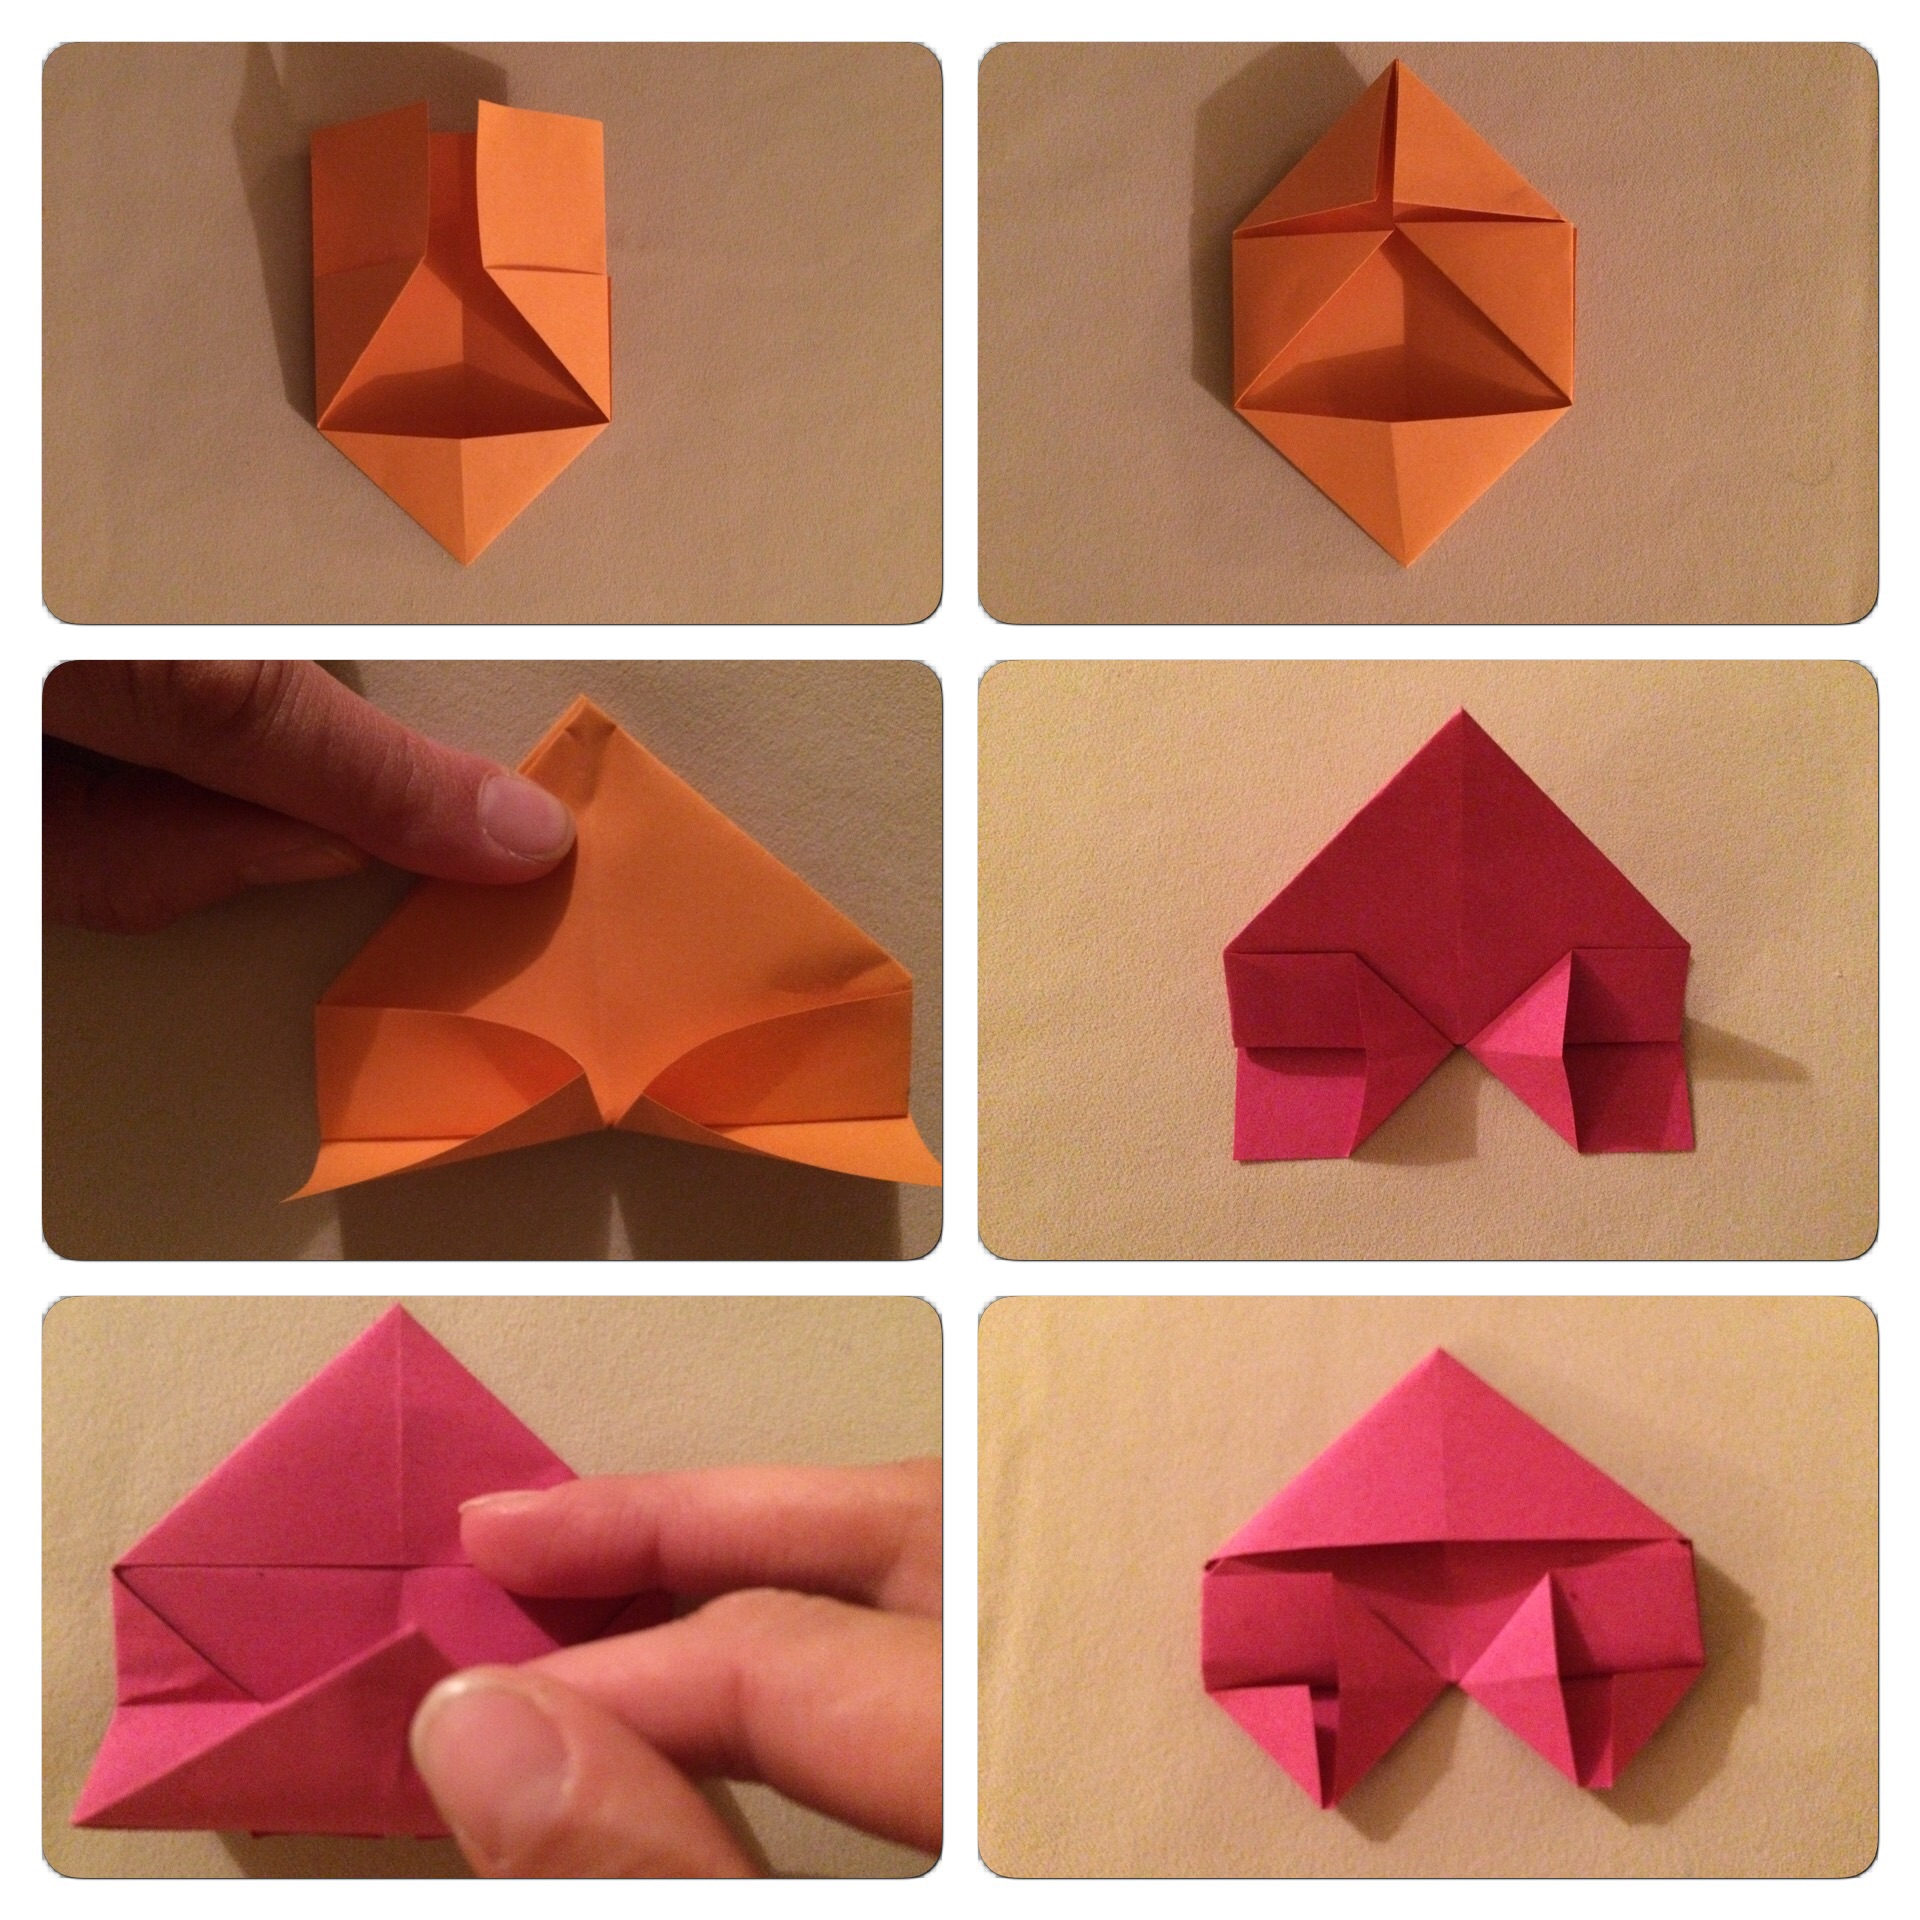 How To Make Small Origami Hearts How To Make A Valentine Heart Bunting Origami Craft The Art Of